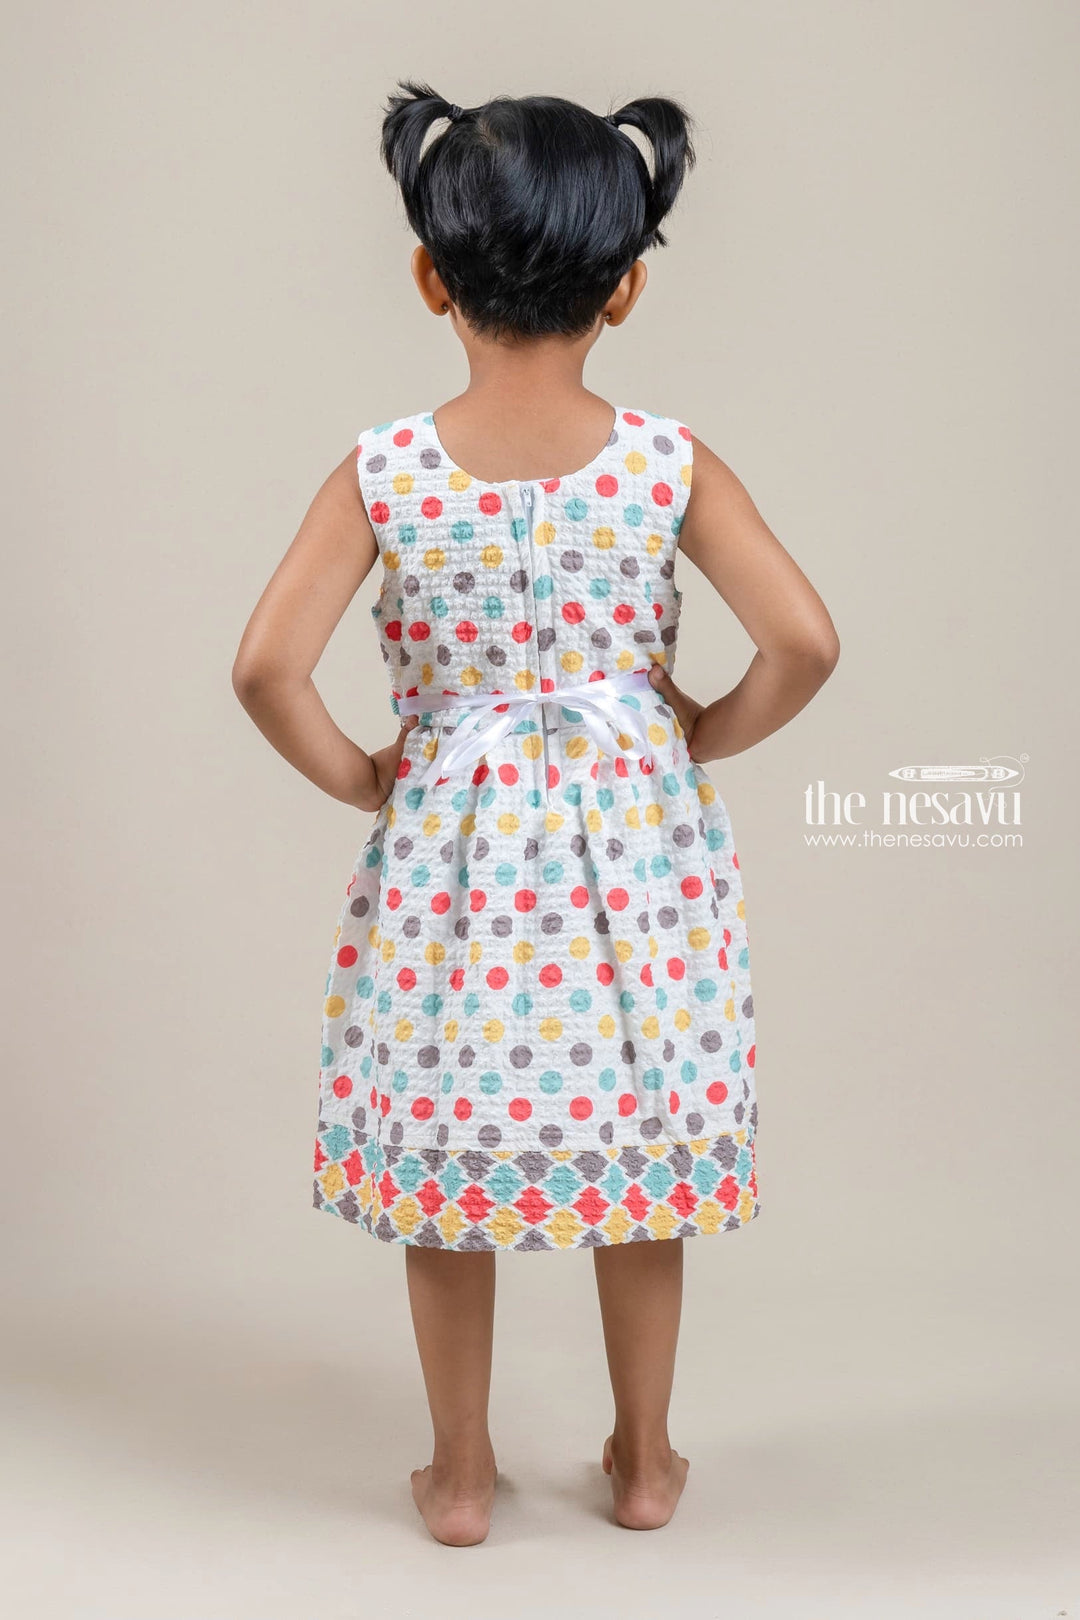 The Nesavu Baby Fancy Frock Lovely Multicolored Polka Dot Printed White Baby Frock With Embellished Green Floral Belt Nesavu Attractive Frock Dress For Dress | Frock For Party | The Nesavu